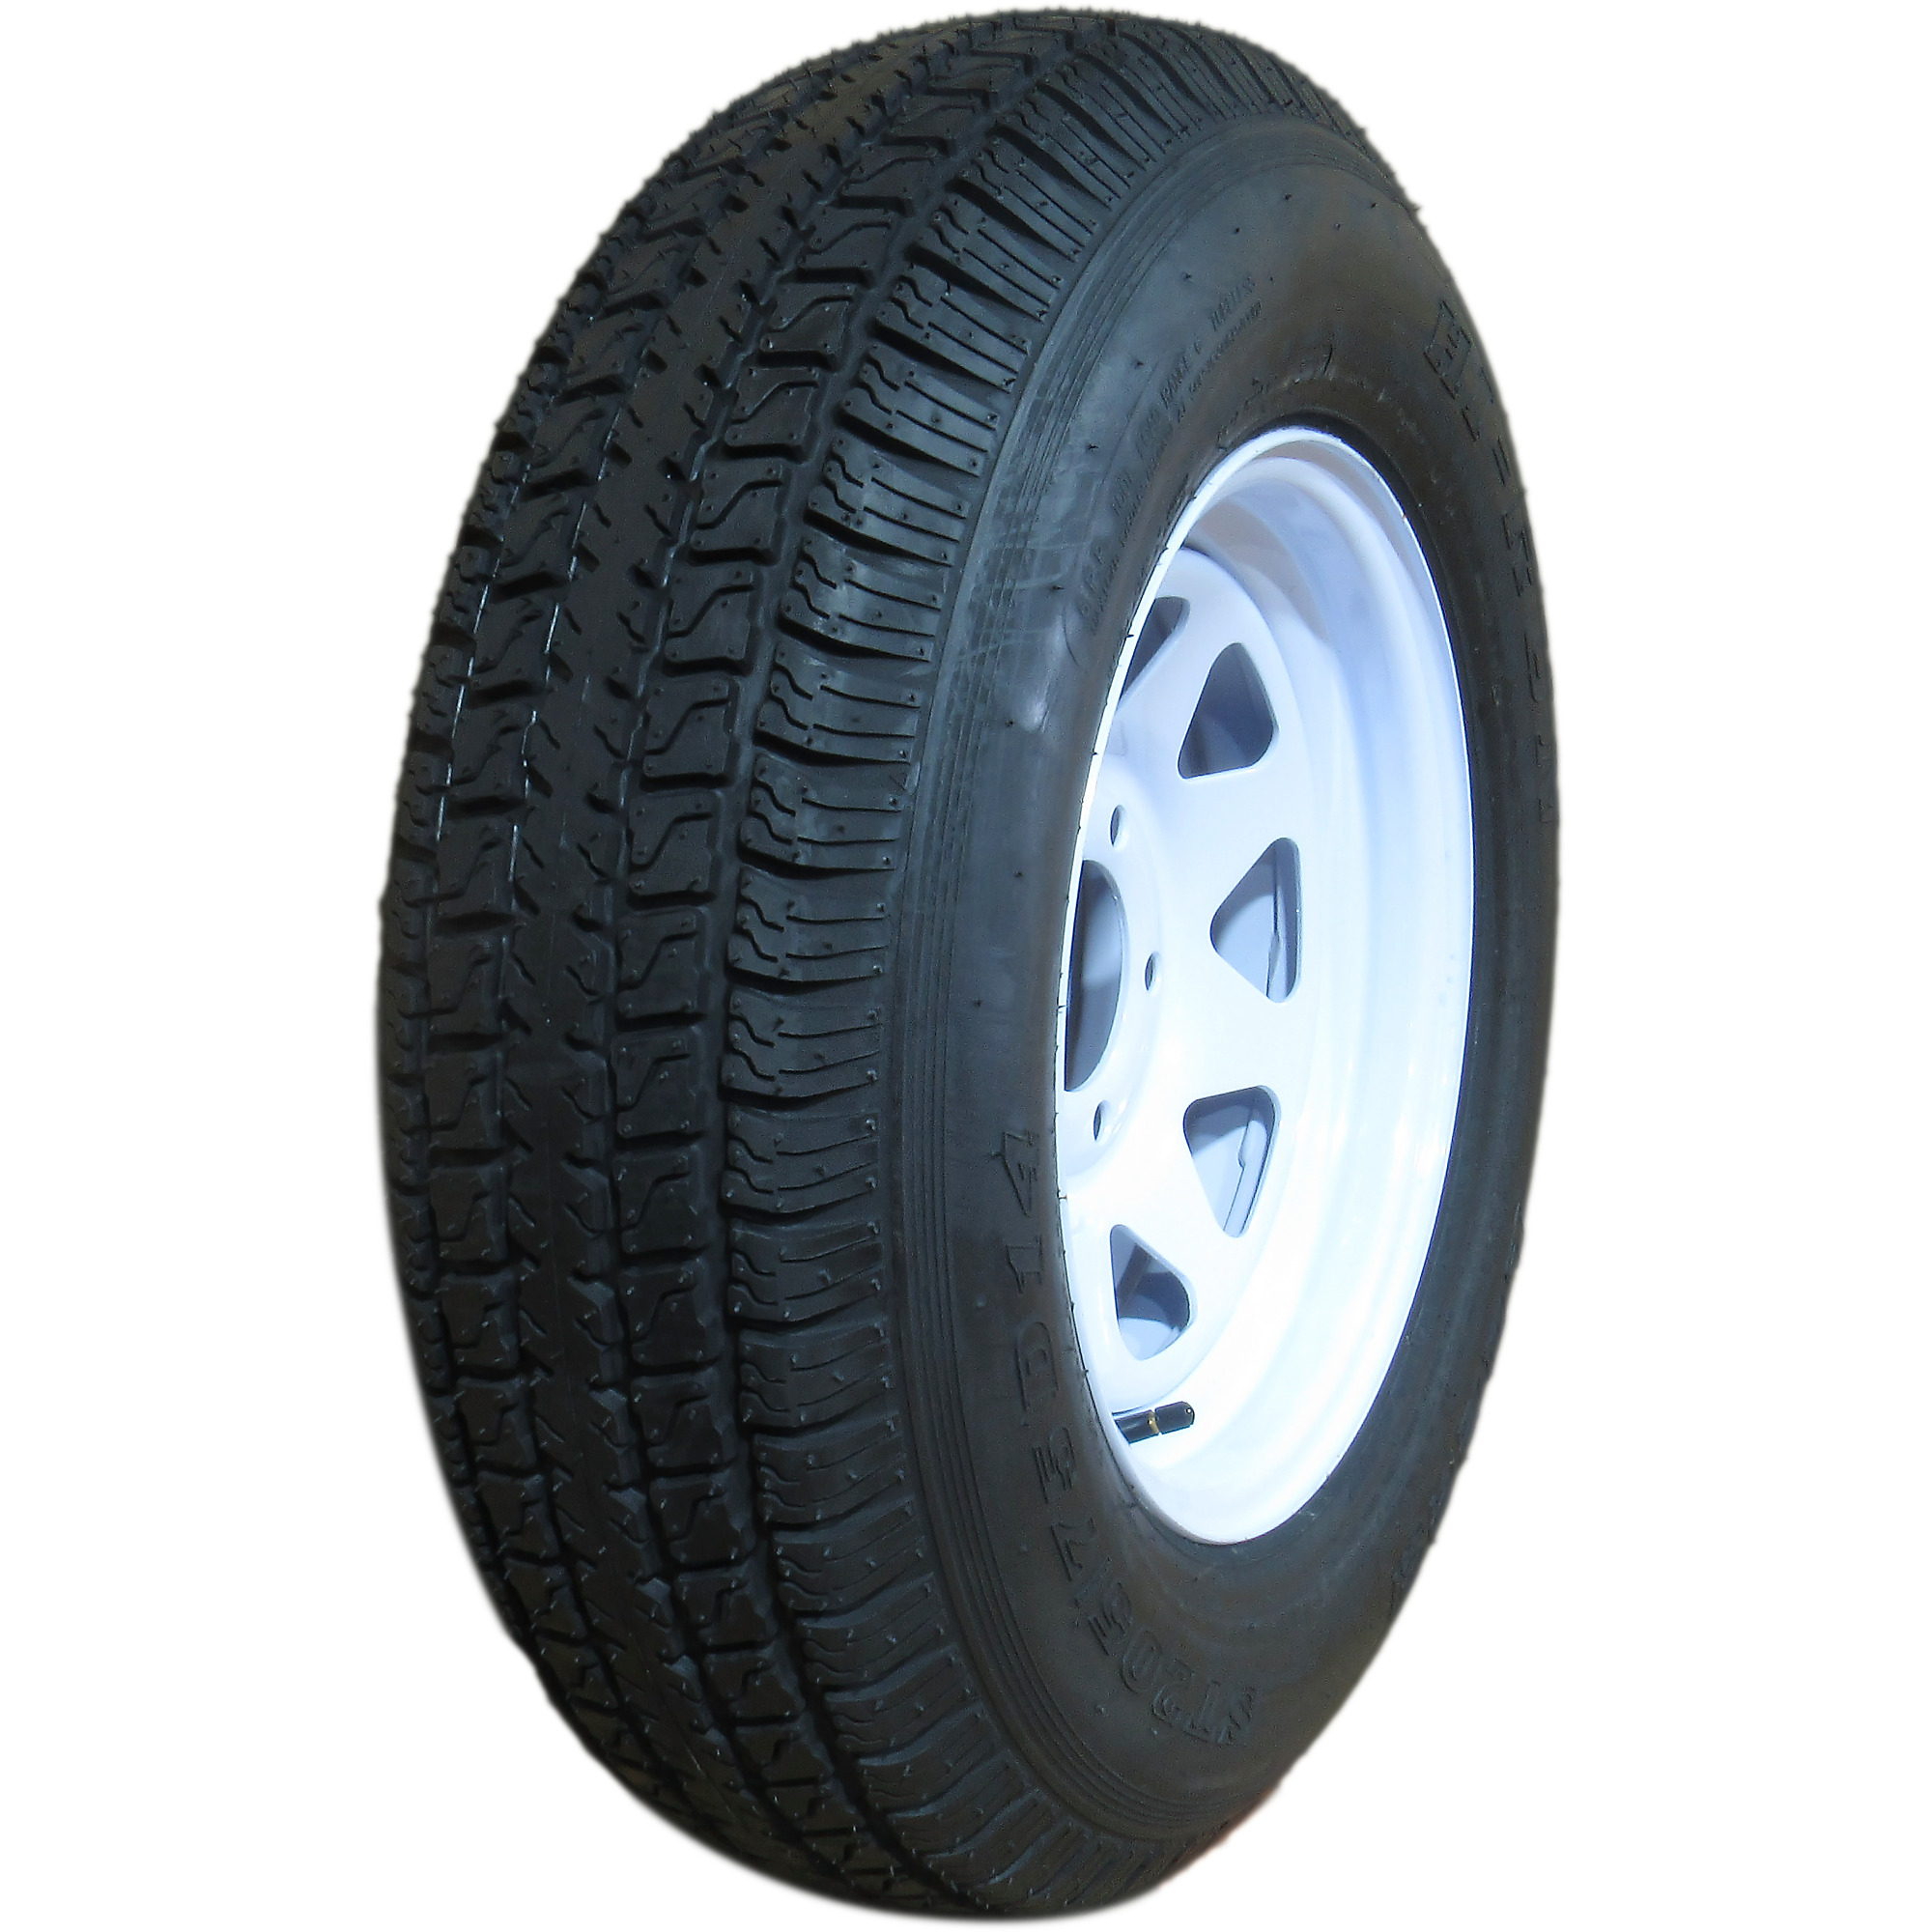 HI-RUN, Highway Trailer Tire Assembly, Bias-Ply, Spoked, Tire Size ST205/75D14 Load Range Rating C, Bolt Holes (qty.) 5 Model ASB1002